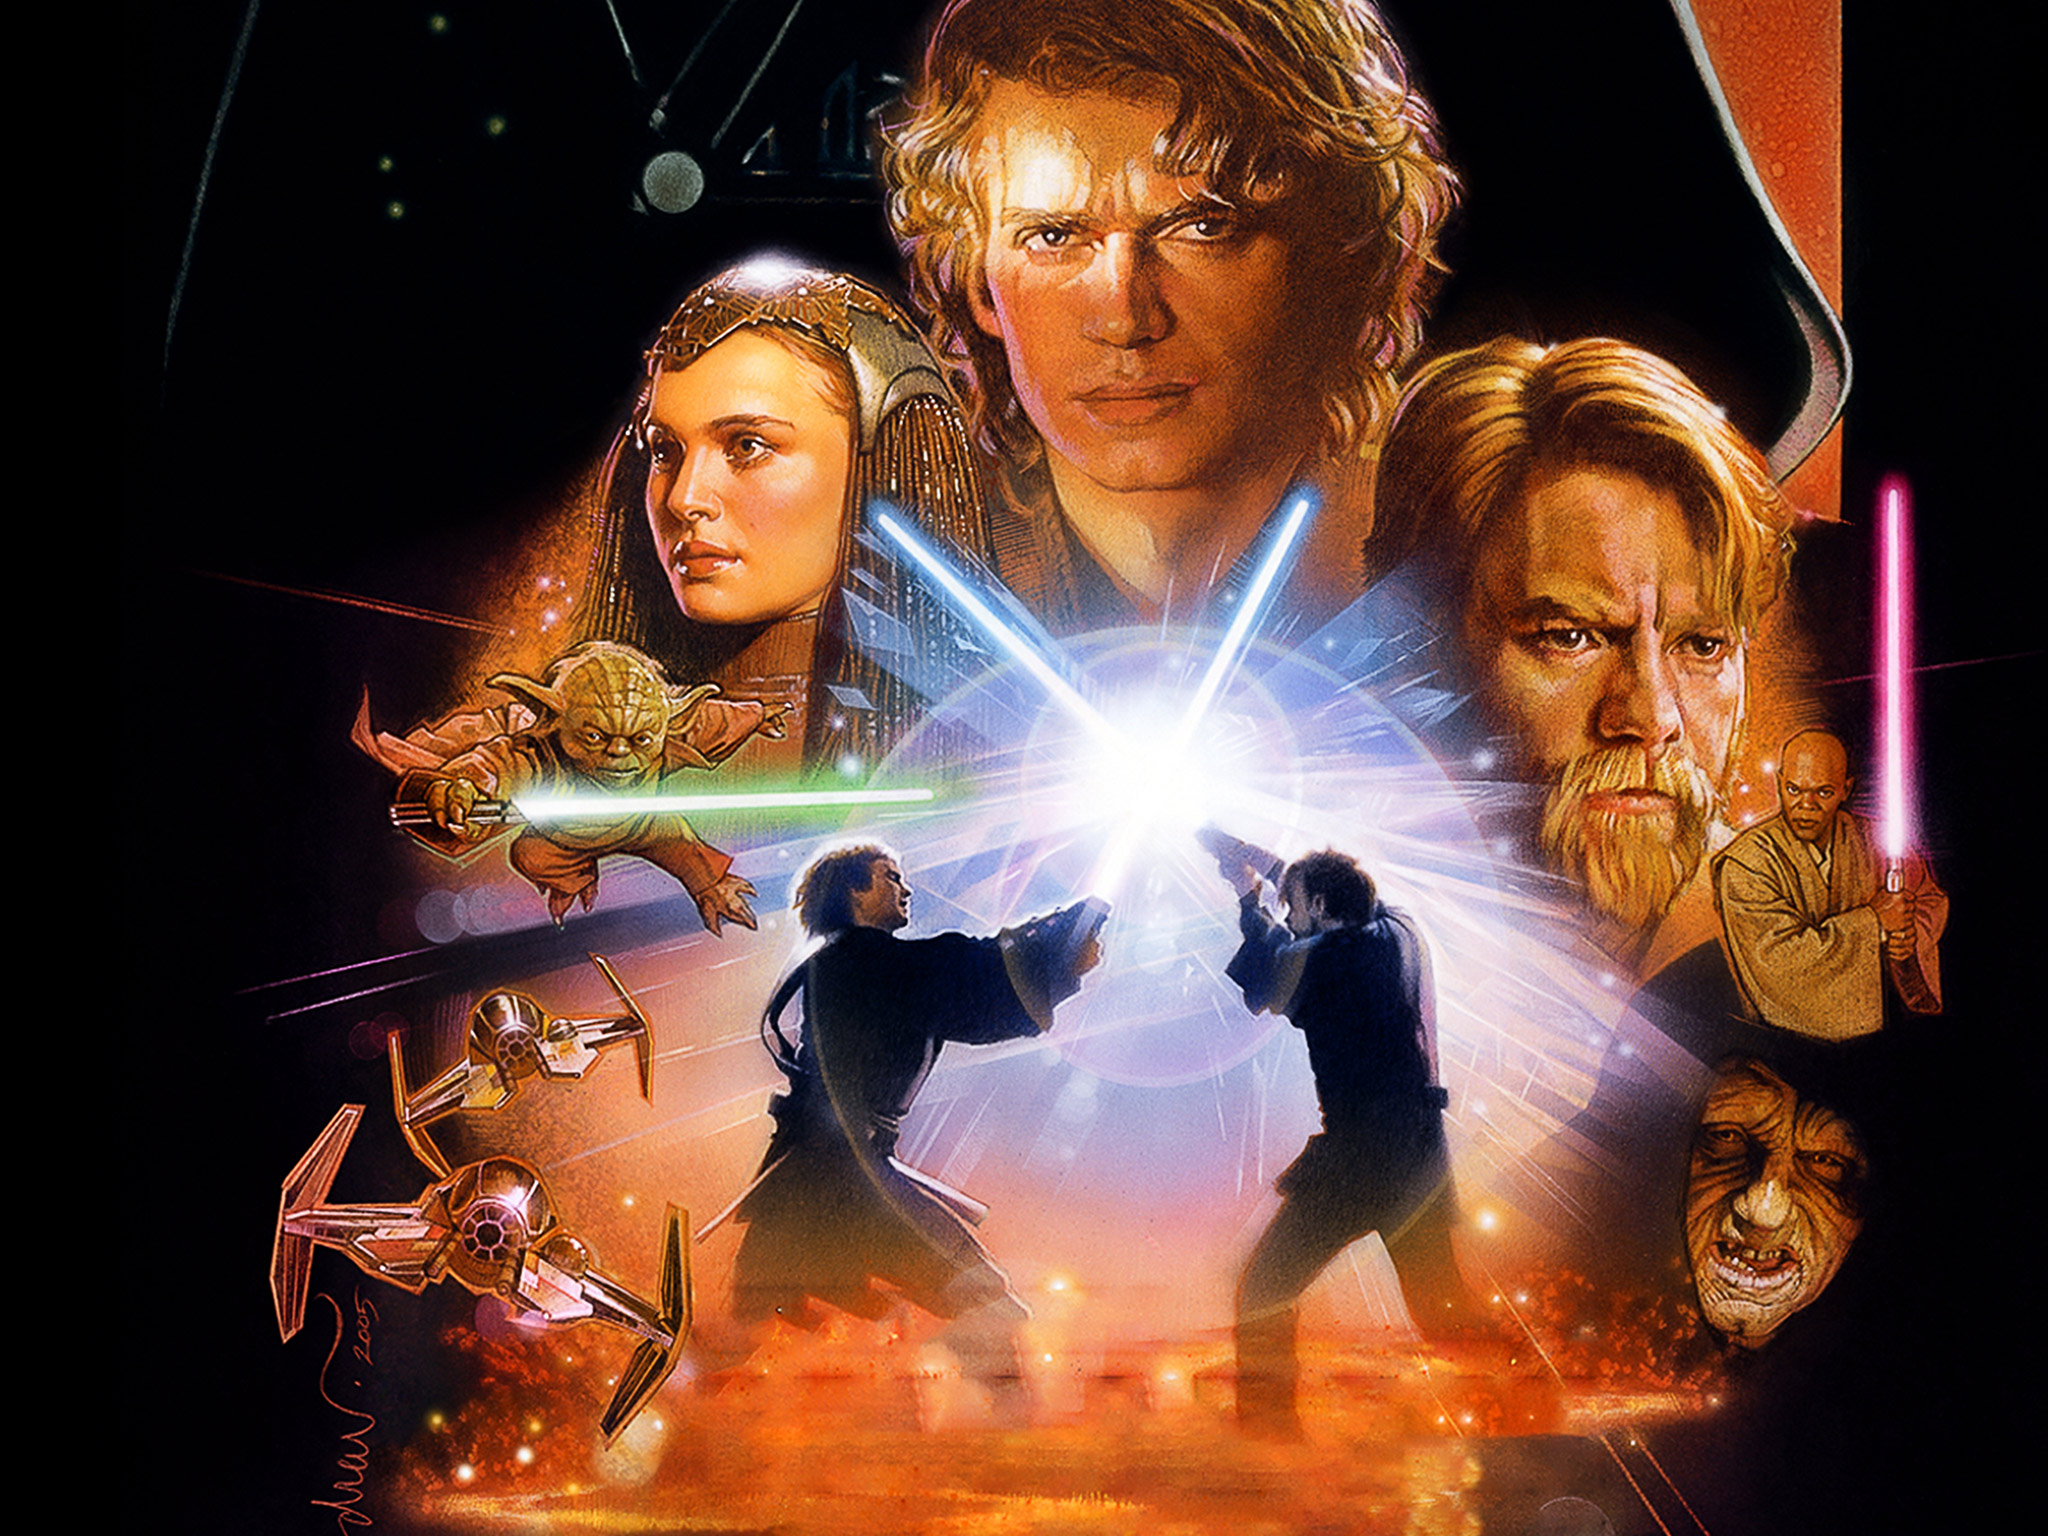 Star Wars: Revenge of the Sith - Where to Watch and Stream - TV Guide